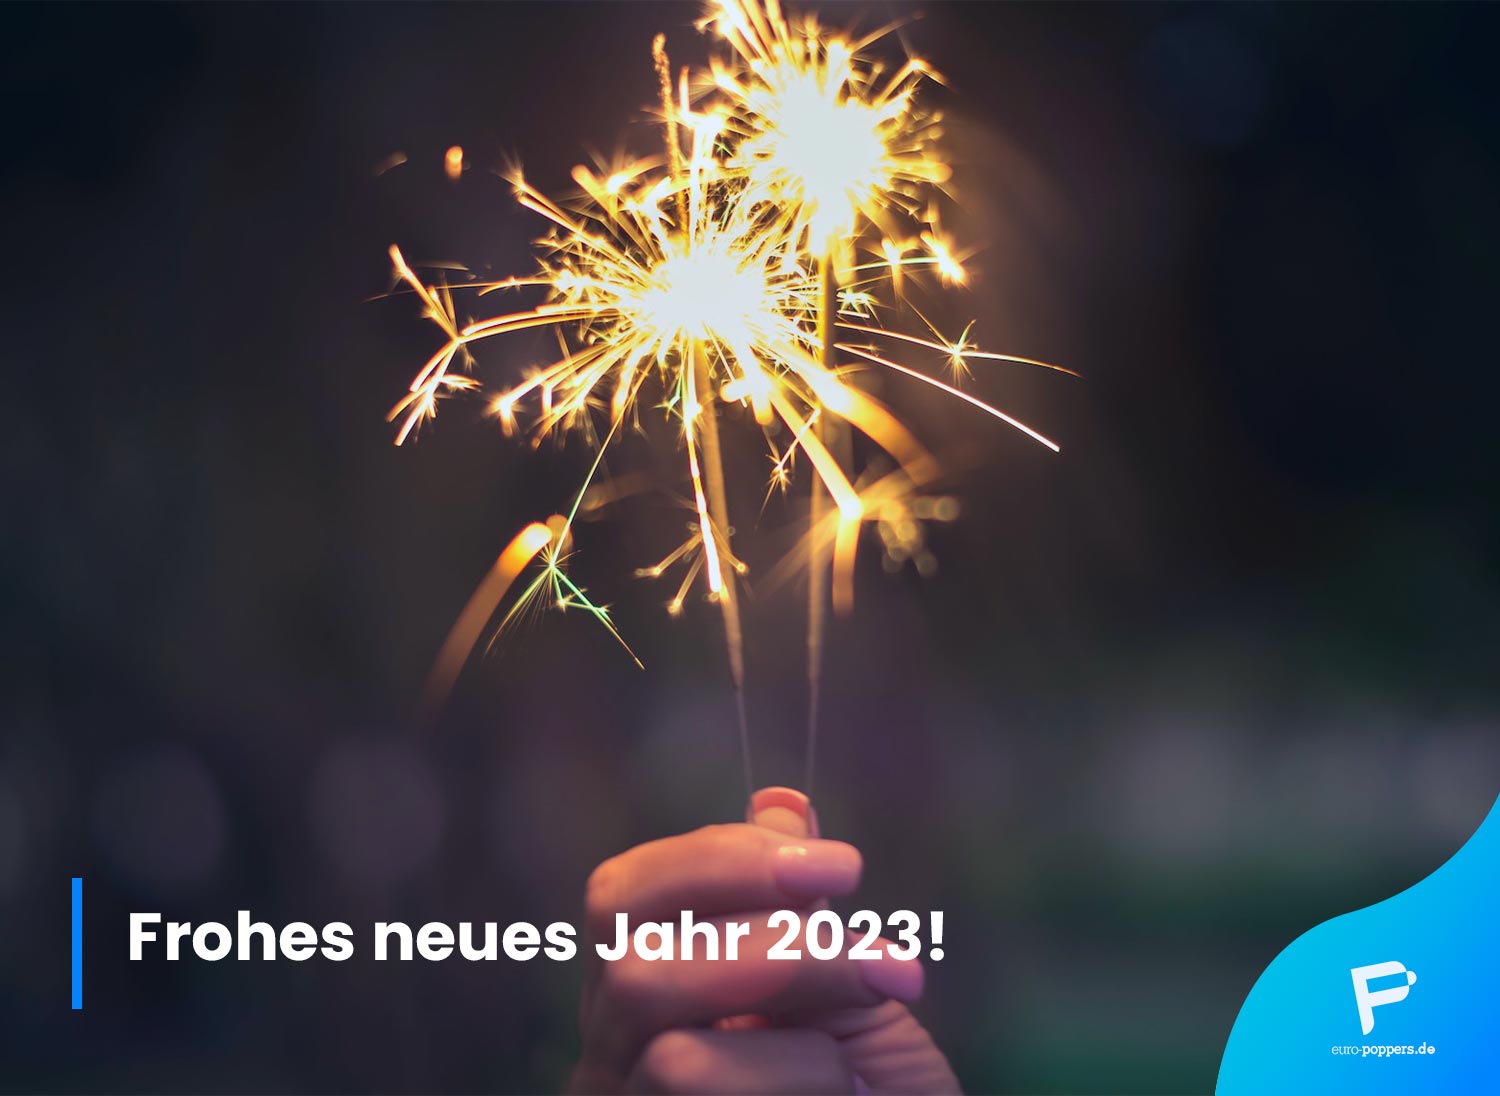 You are currently viewing Frohes neues Jahr 2023!